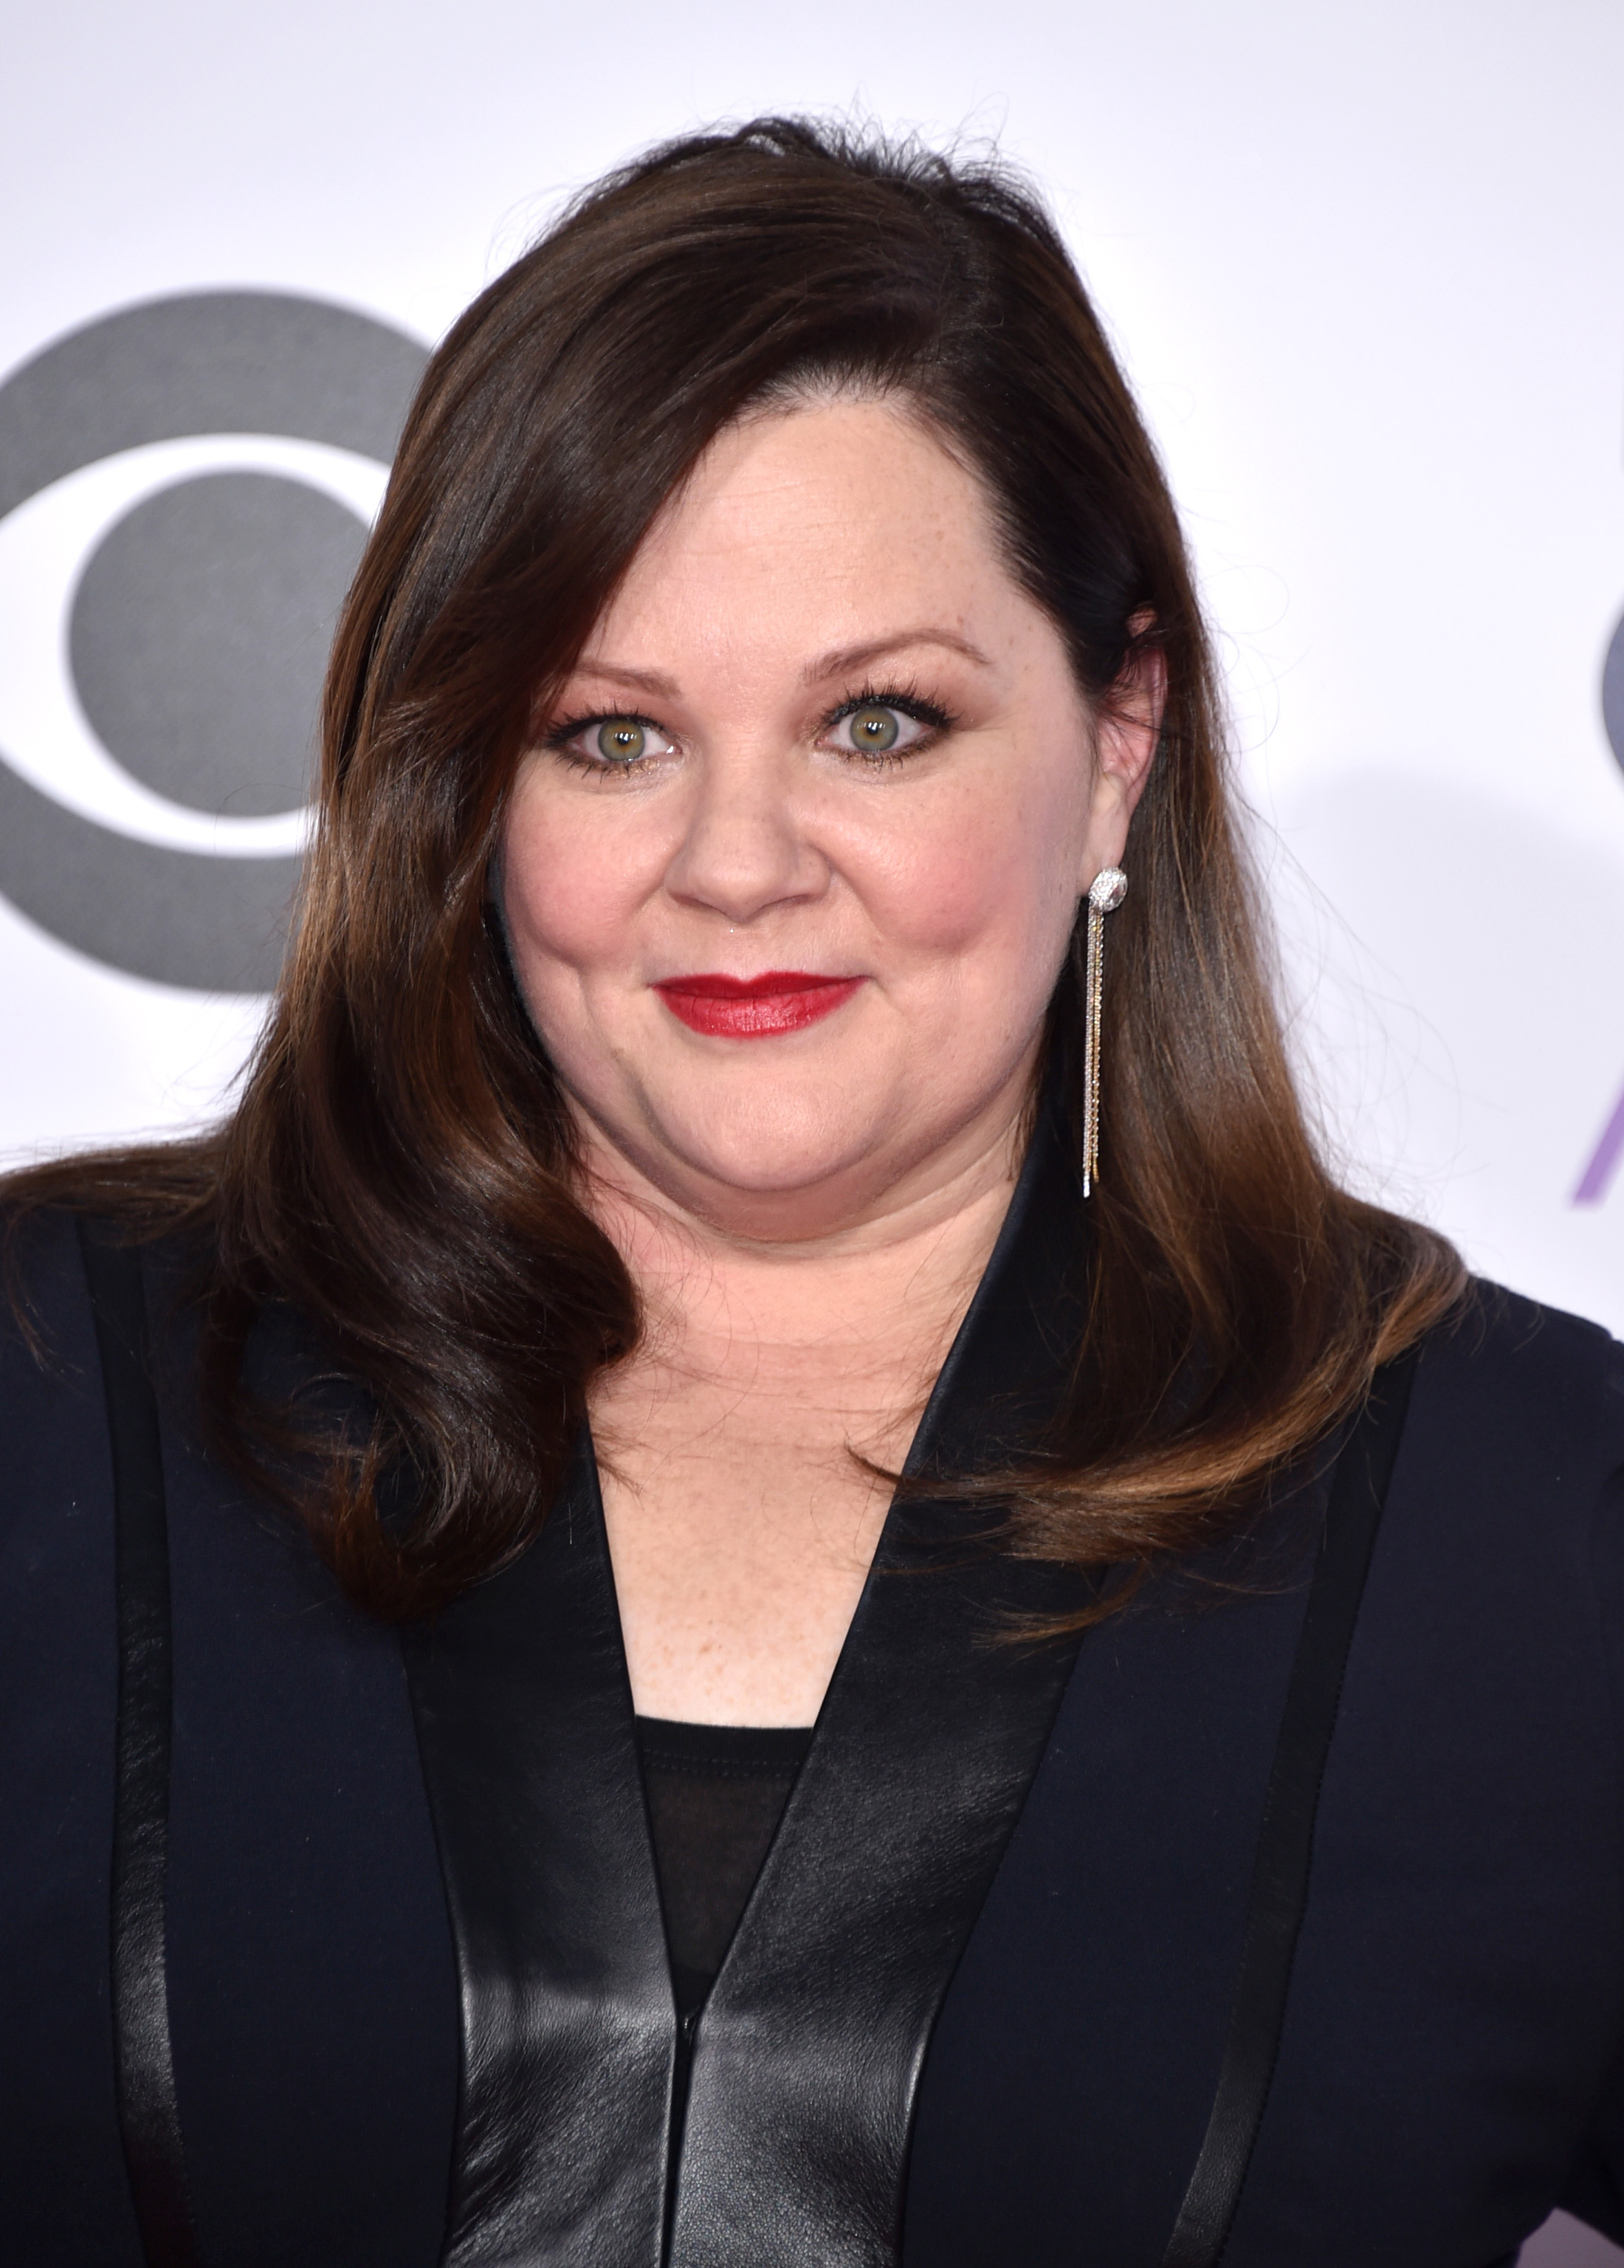 Melissa McCarthy arrives at the People's Choice Awards at the Nokia Theatre on Jan. 7, 2015, in Los Angeles. (John Shearer—Invision/AP)